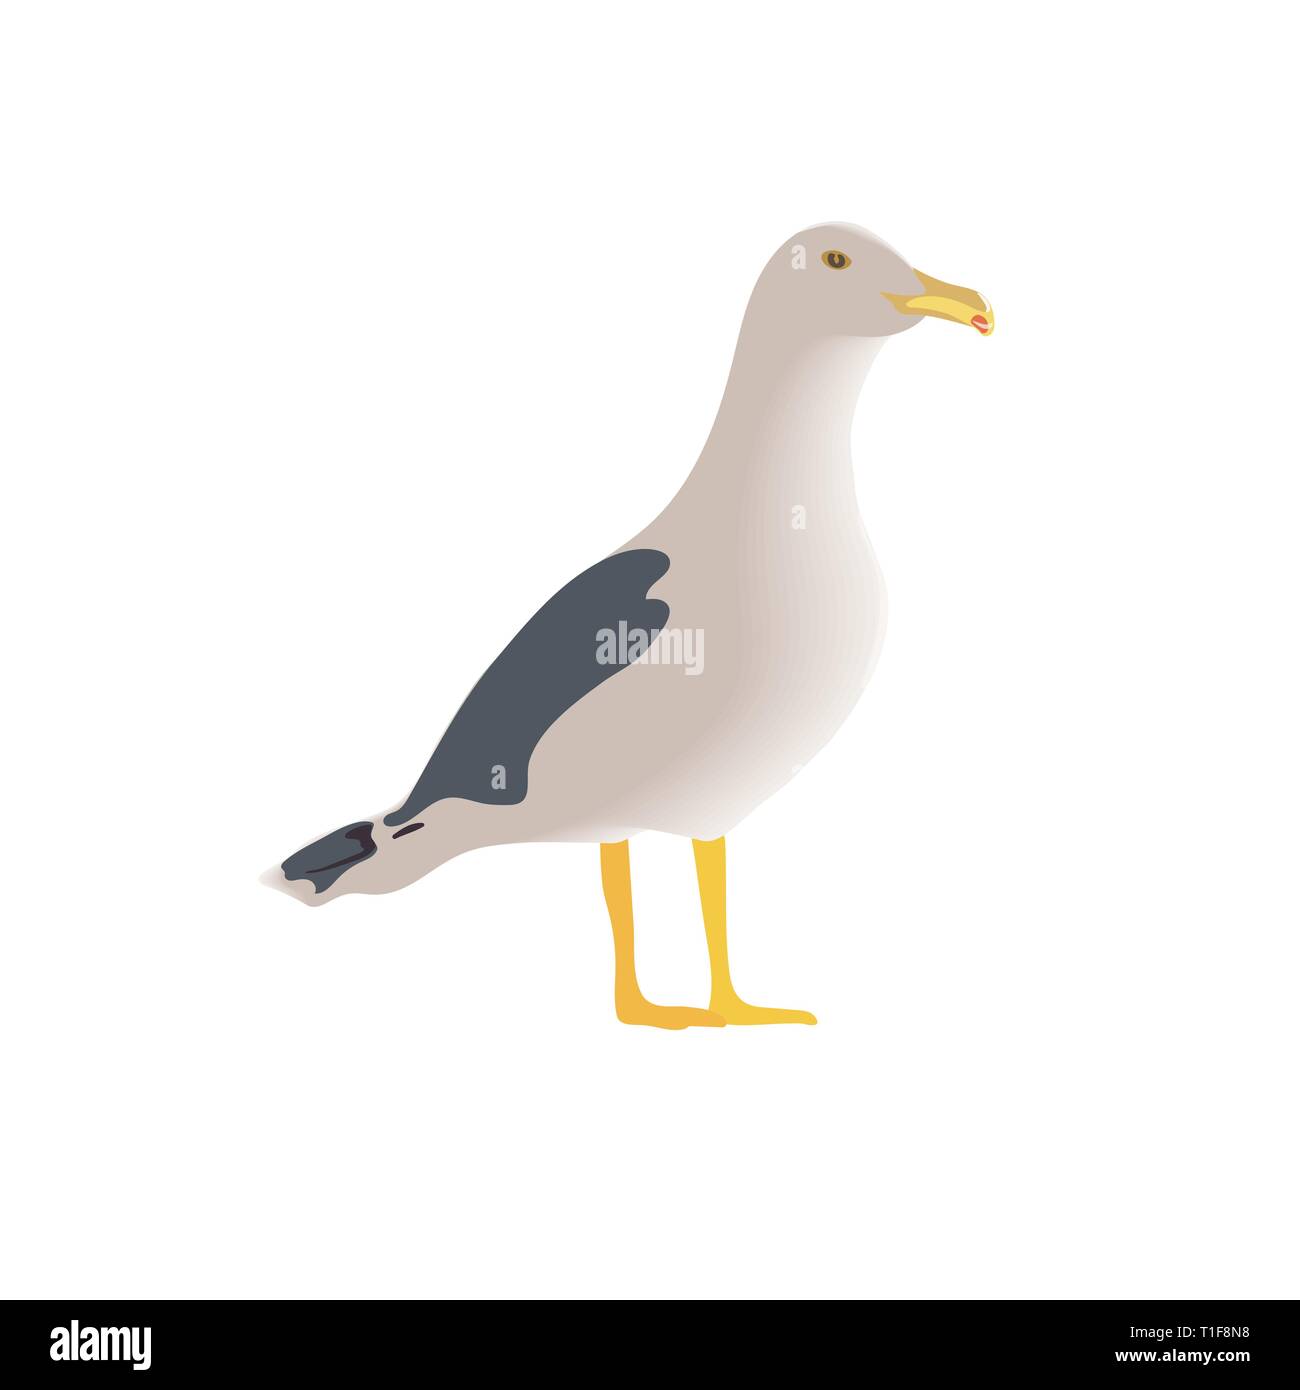 Resting curious standing sea bird, half side view, long neck, white feathers, legs, yellow beak, folded spotted wings. Stock Vector